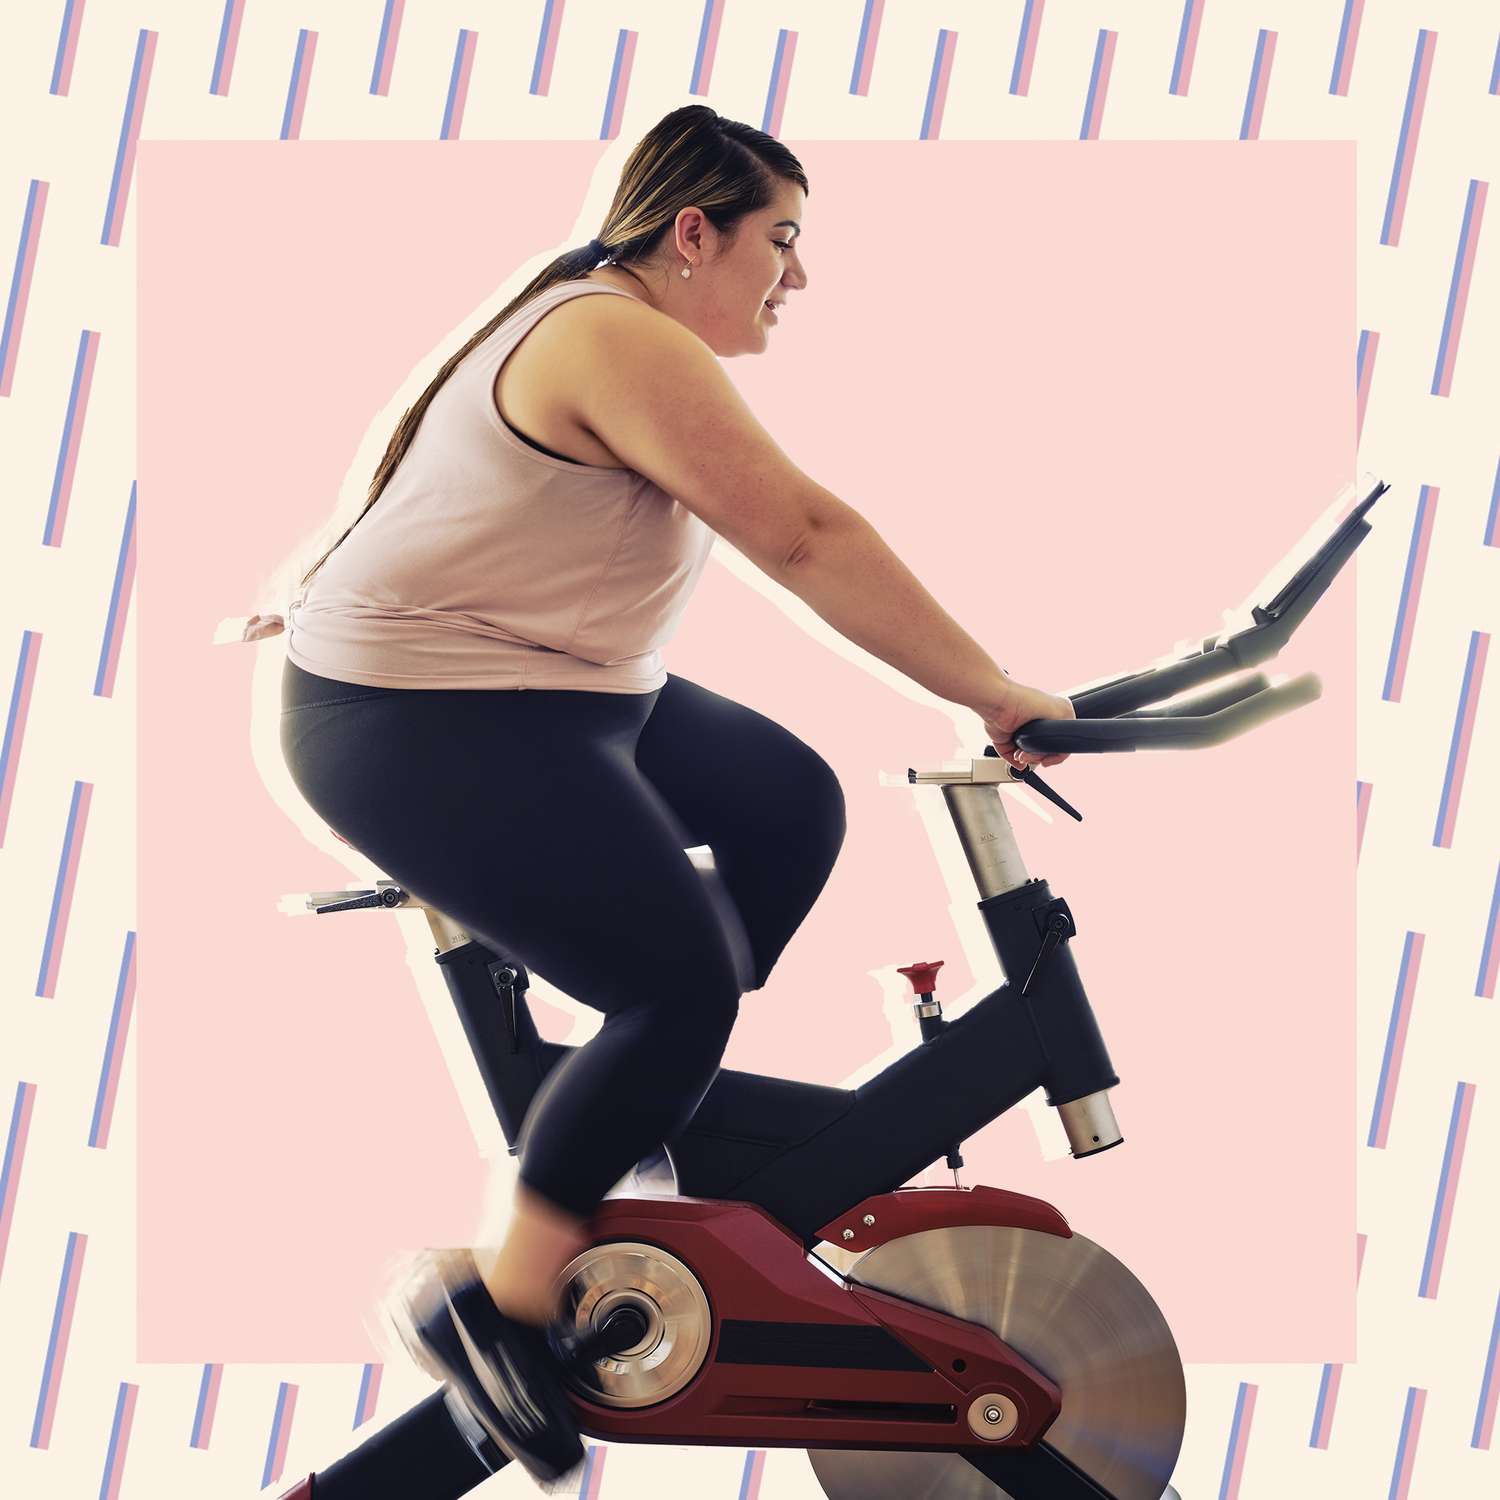 A woman exercising in her home on an exercise bike.